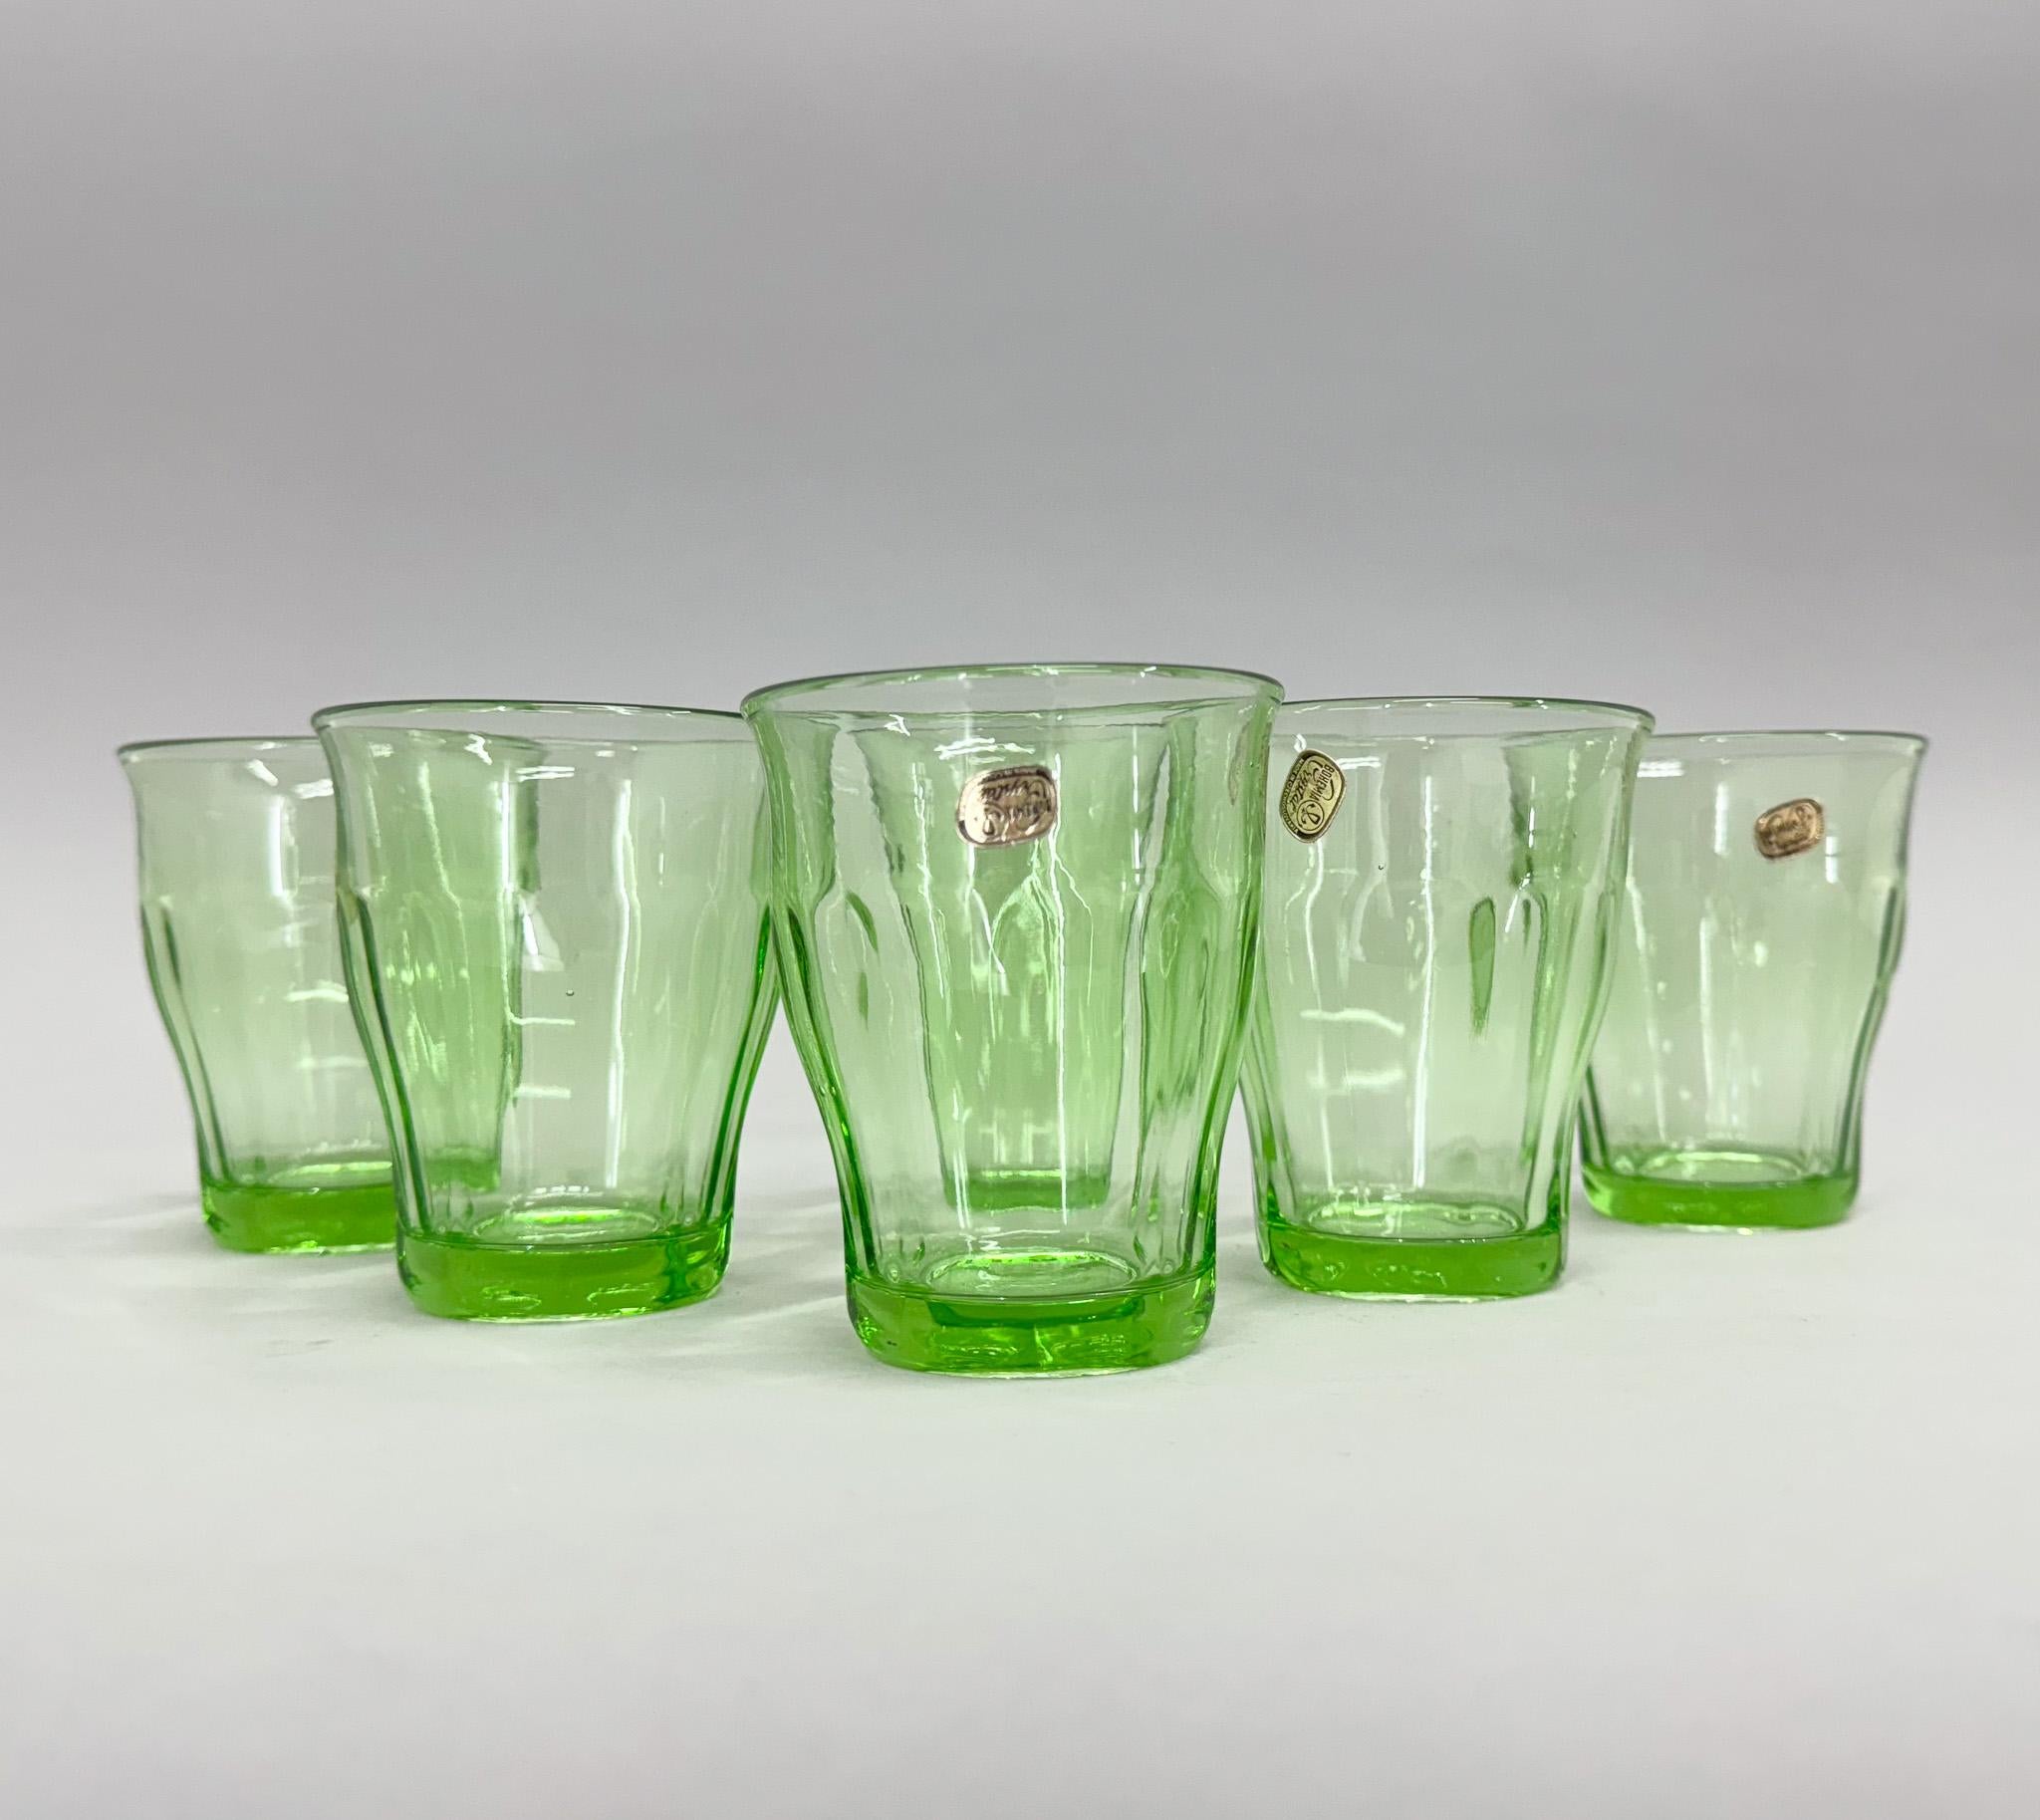 Set of six Bohemian Crystal glasses made of uranium glass and produced in former Czechoslovakia in the 1970s. Still labled, probably never used.